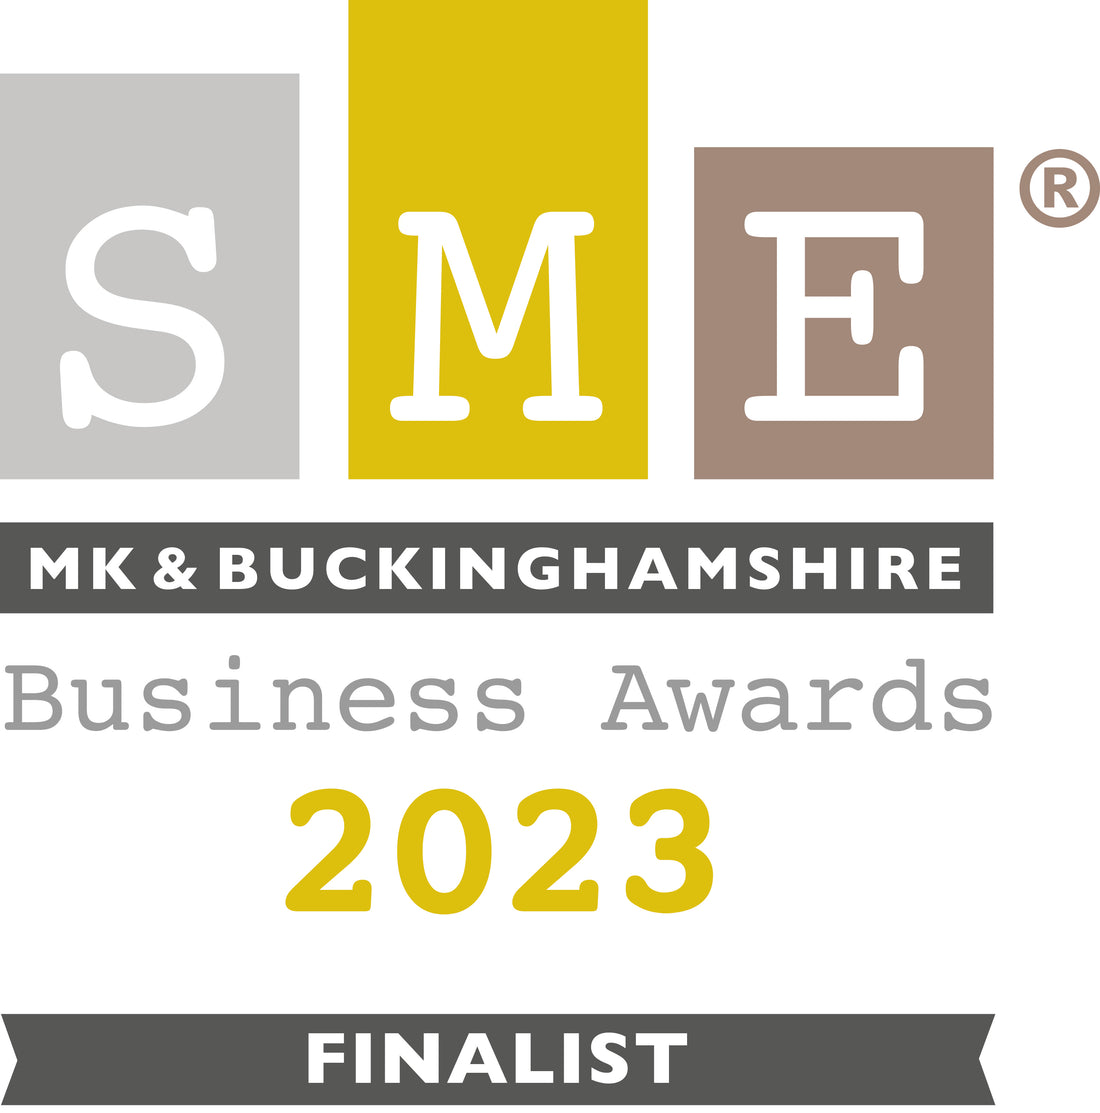 NU ERA SPIRITS: Finalist for Best New Small Business of the Year at SME MK and Buckinghamshire Business Awards